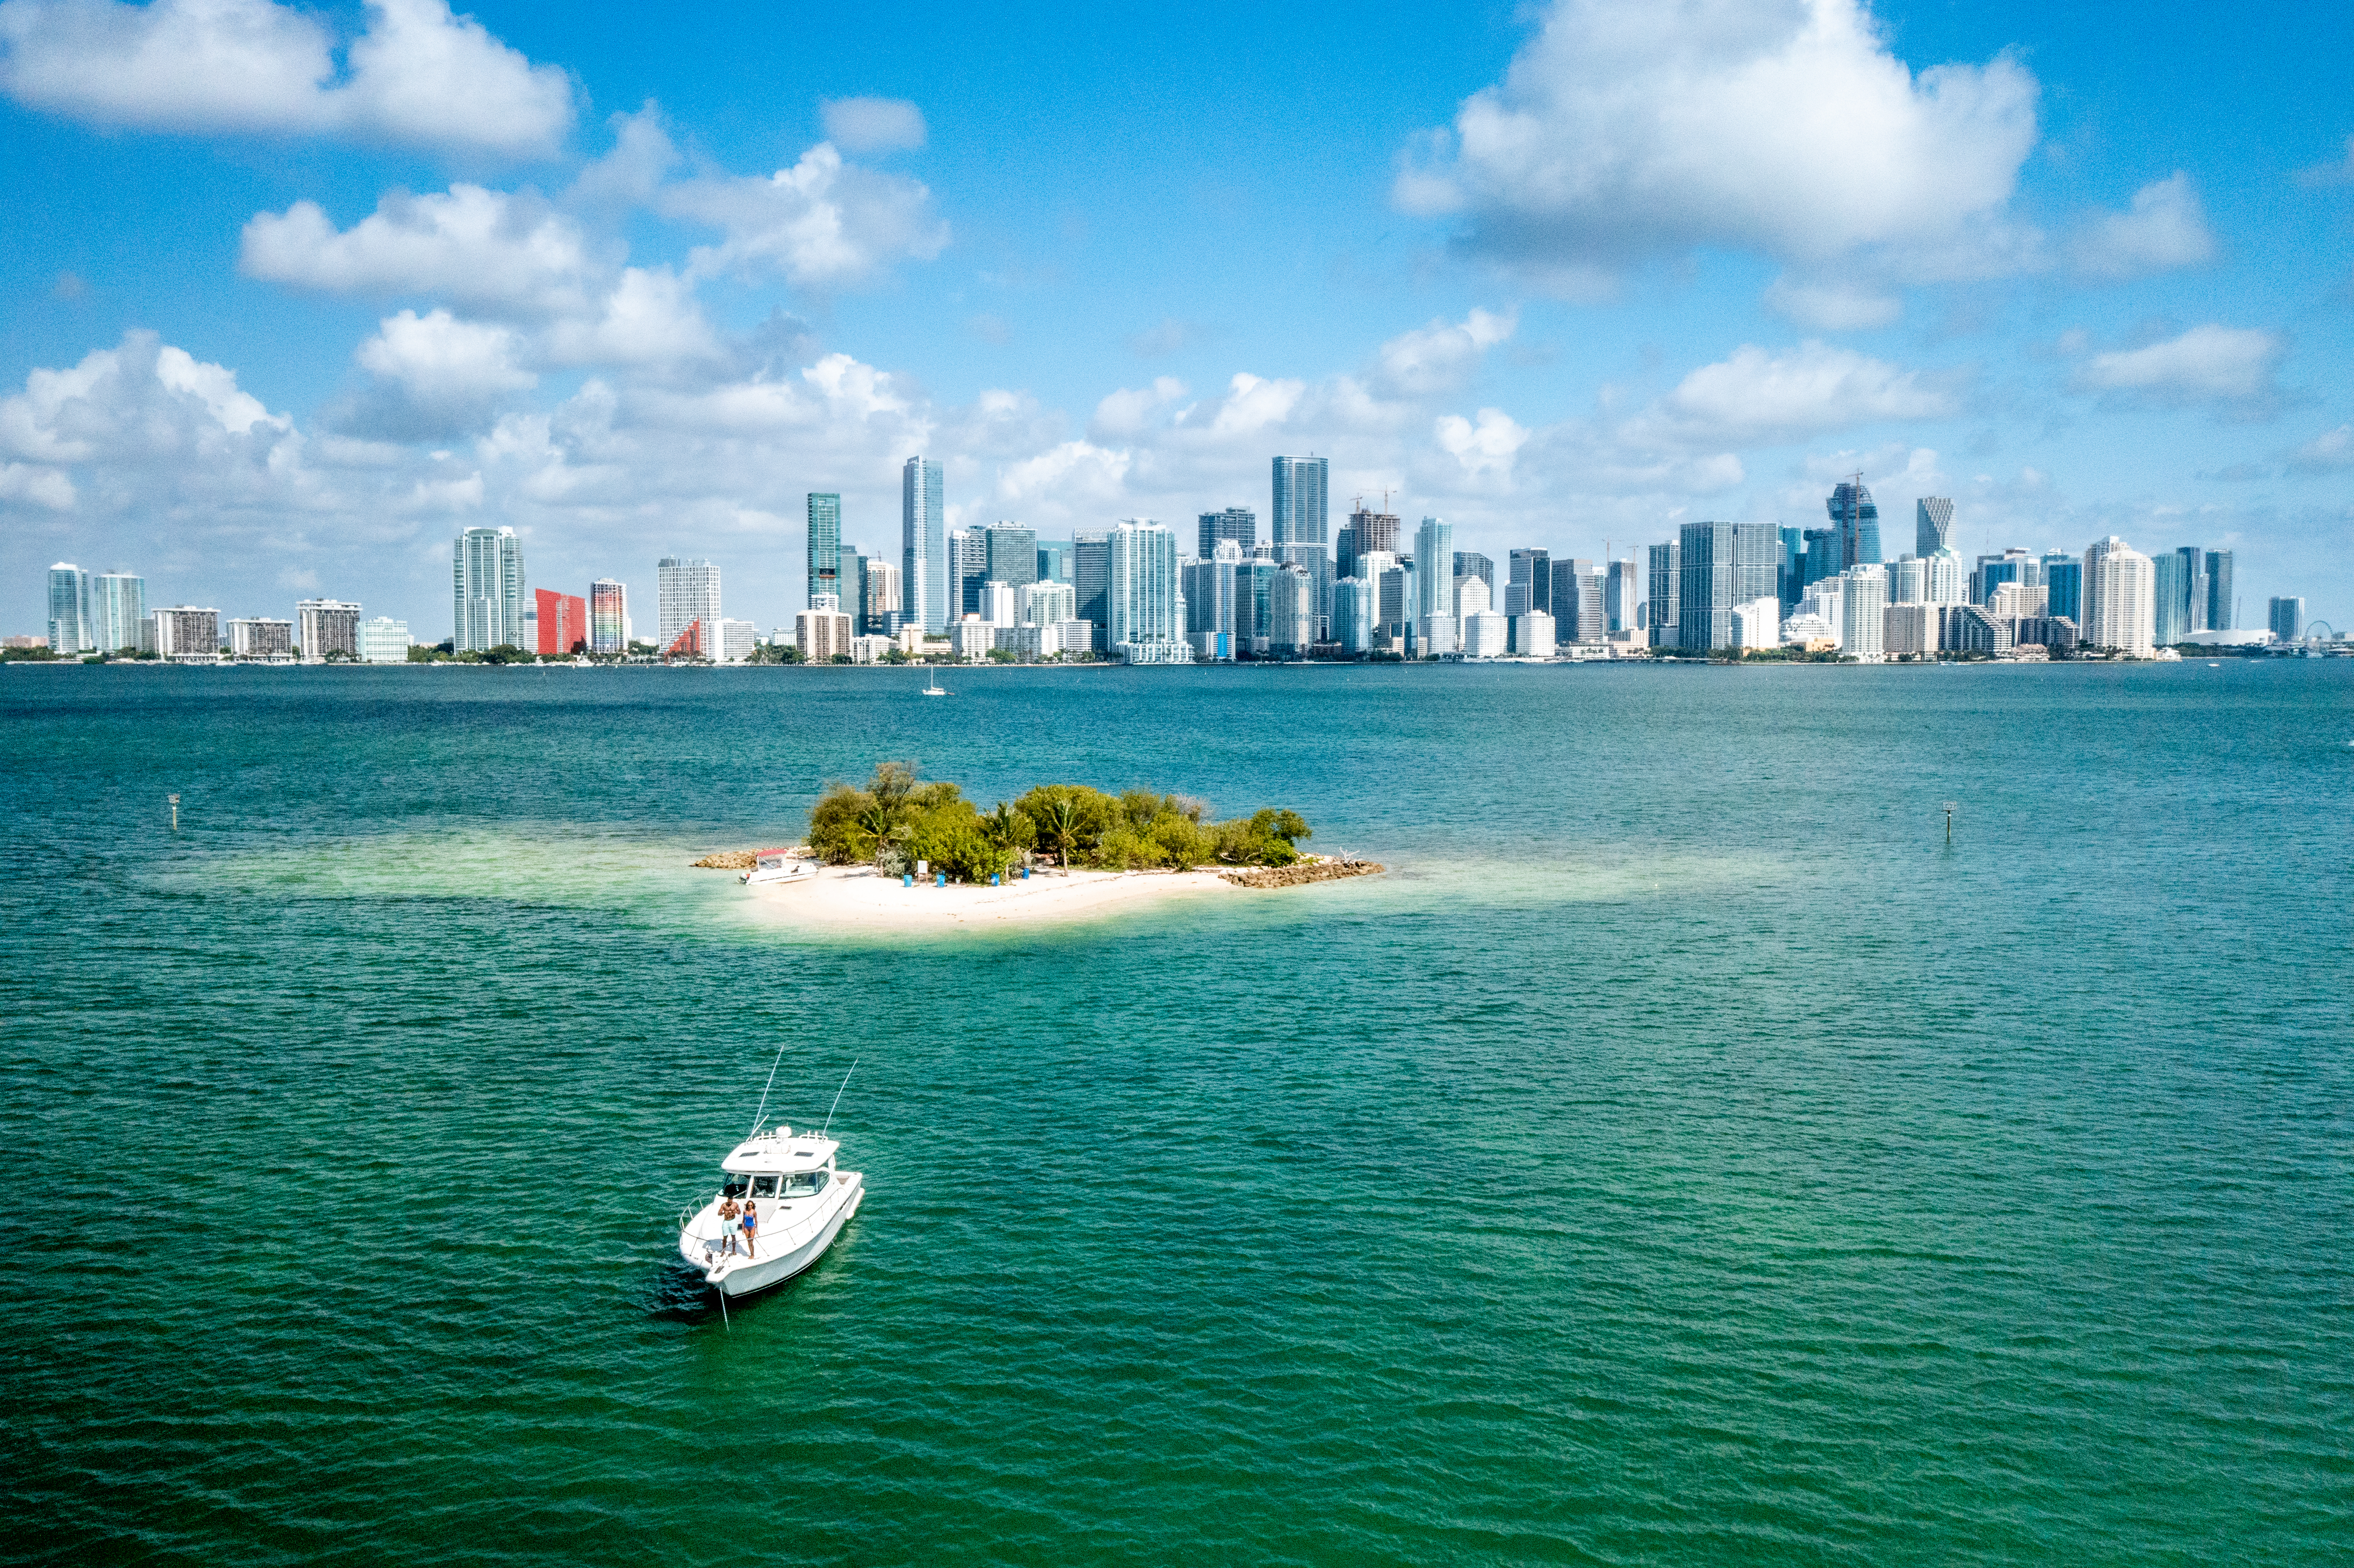 The water surrounding Miami with a boat tour in progress